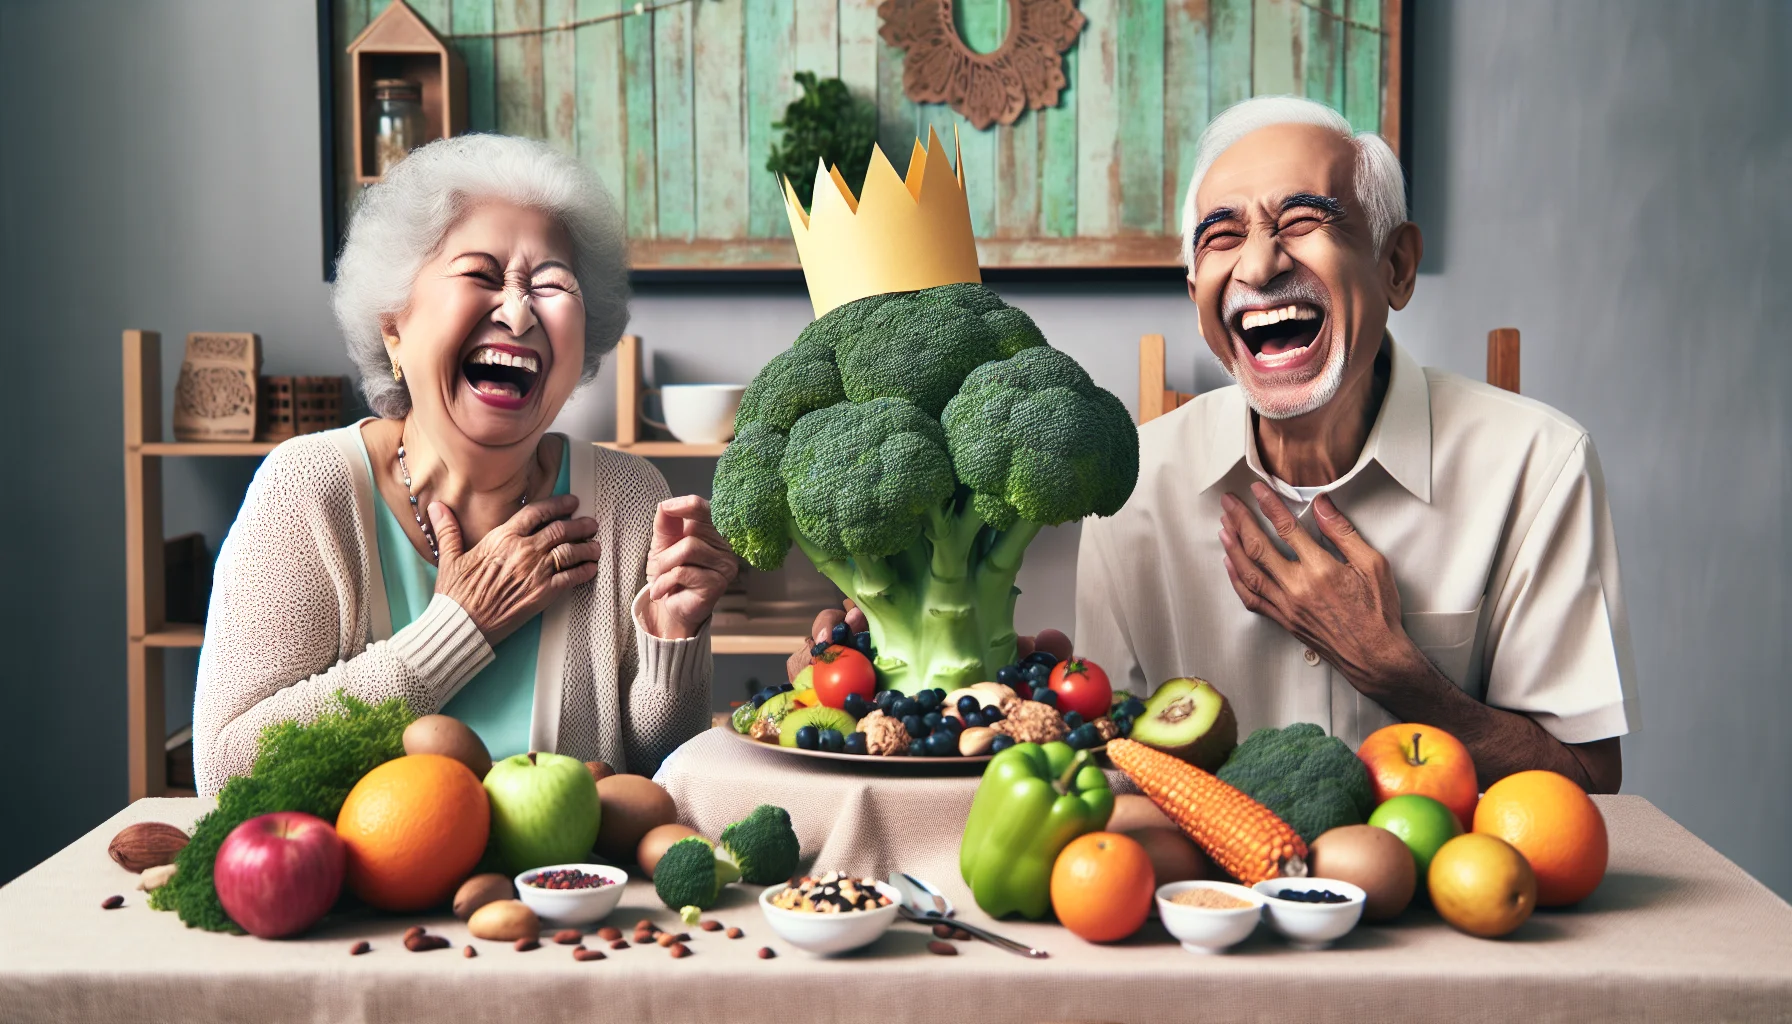 Generate an image that showcases a humorous culinary setting for senior citizens. In this scenario, two elderly individuals, one of South Asian descent and the other of Hispanic descent, laughing heartily are sitting at a table laden with an array of colorful fruits, vegetables, and whole grains, signifying healthy eating options. They are bemusedly looking at an oversized broccoli that is standing tall on a pedestal on the table, adorned with paper 'crown', to signify the concept of 'Superfood'. The backdrop is a light-hearted, welcoming atmosphere, emphasising the joyous aspects of implementing a healthy diet during the golden years.